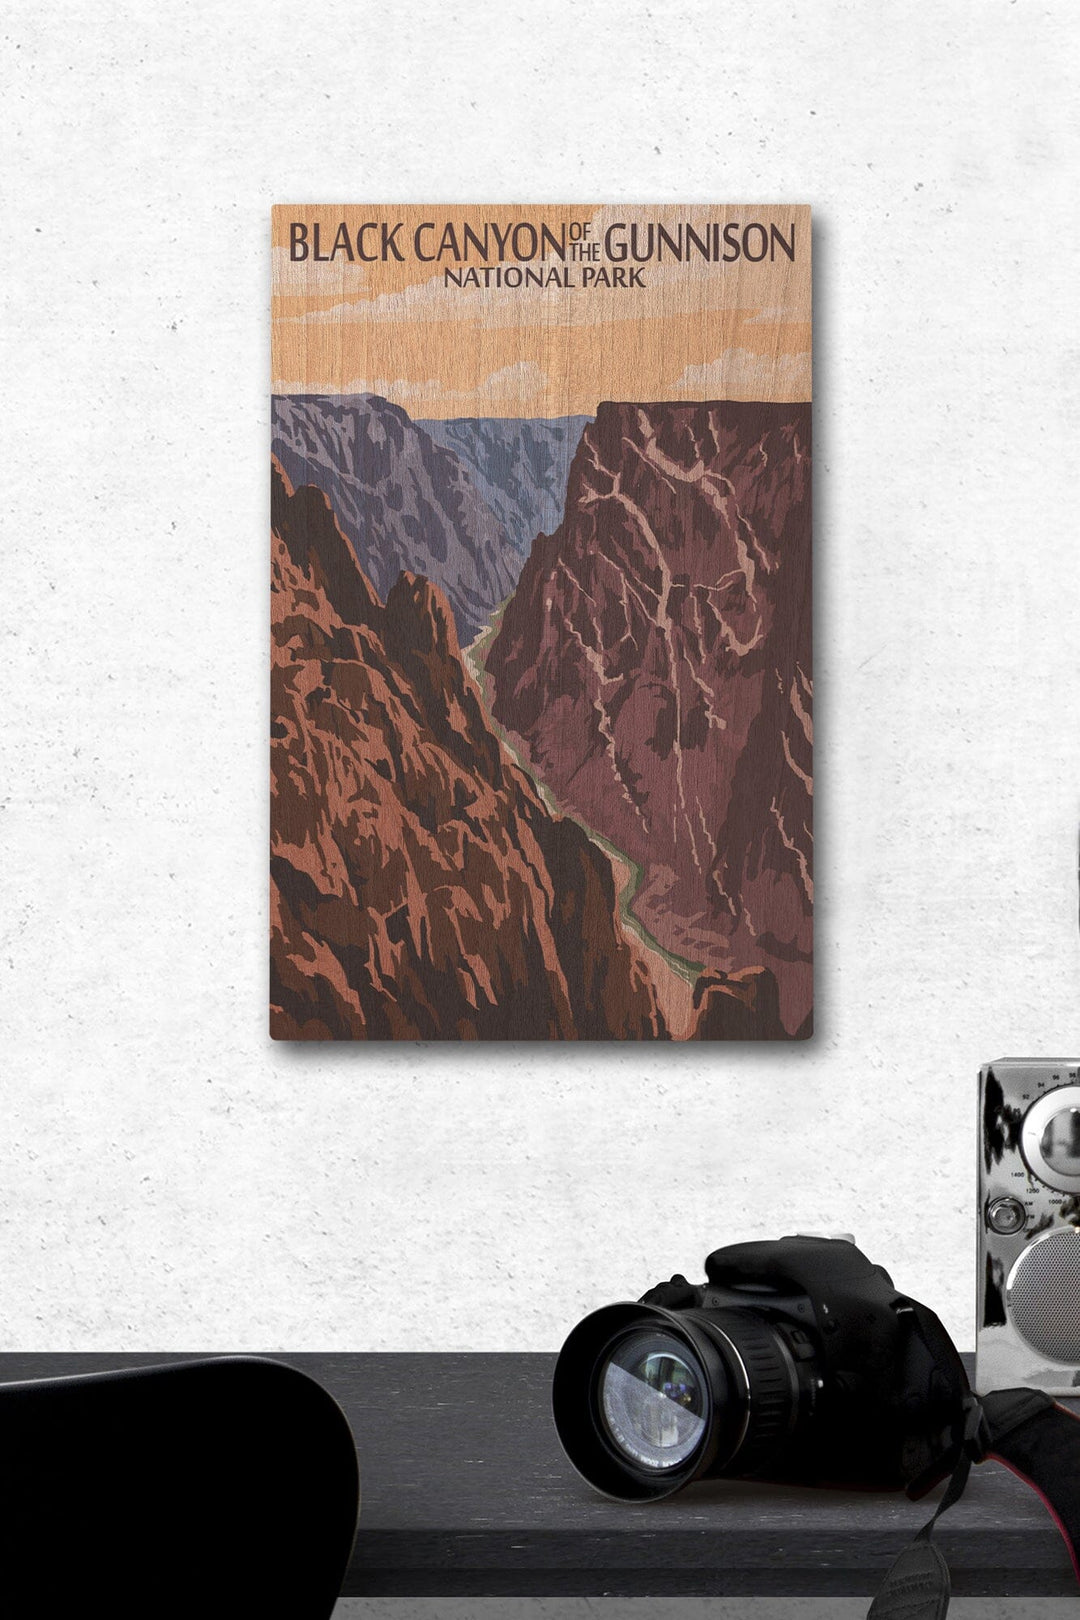 Black Canyon of the Gunnison National Park, Colorado, River & Cliffs, Painterly Series, Lantern Press Artwork, Wood Signs and Postcards Wood Lantern Press 12 x 18 Wood Gallery Print 